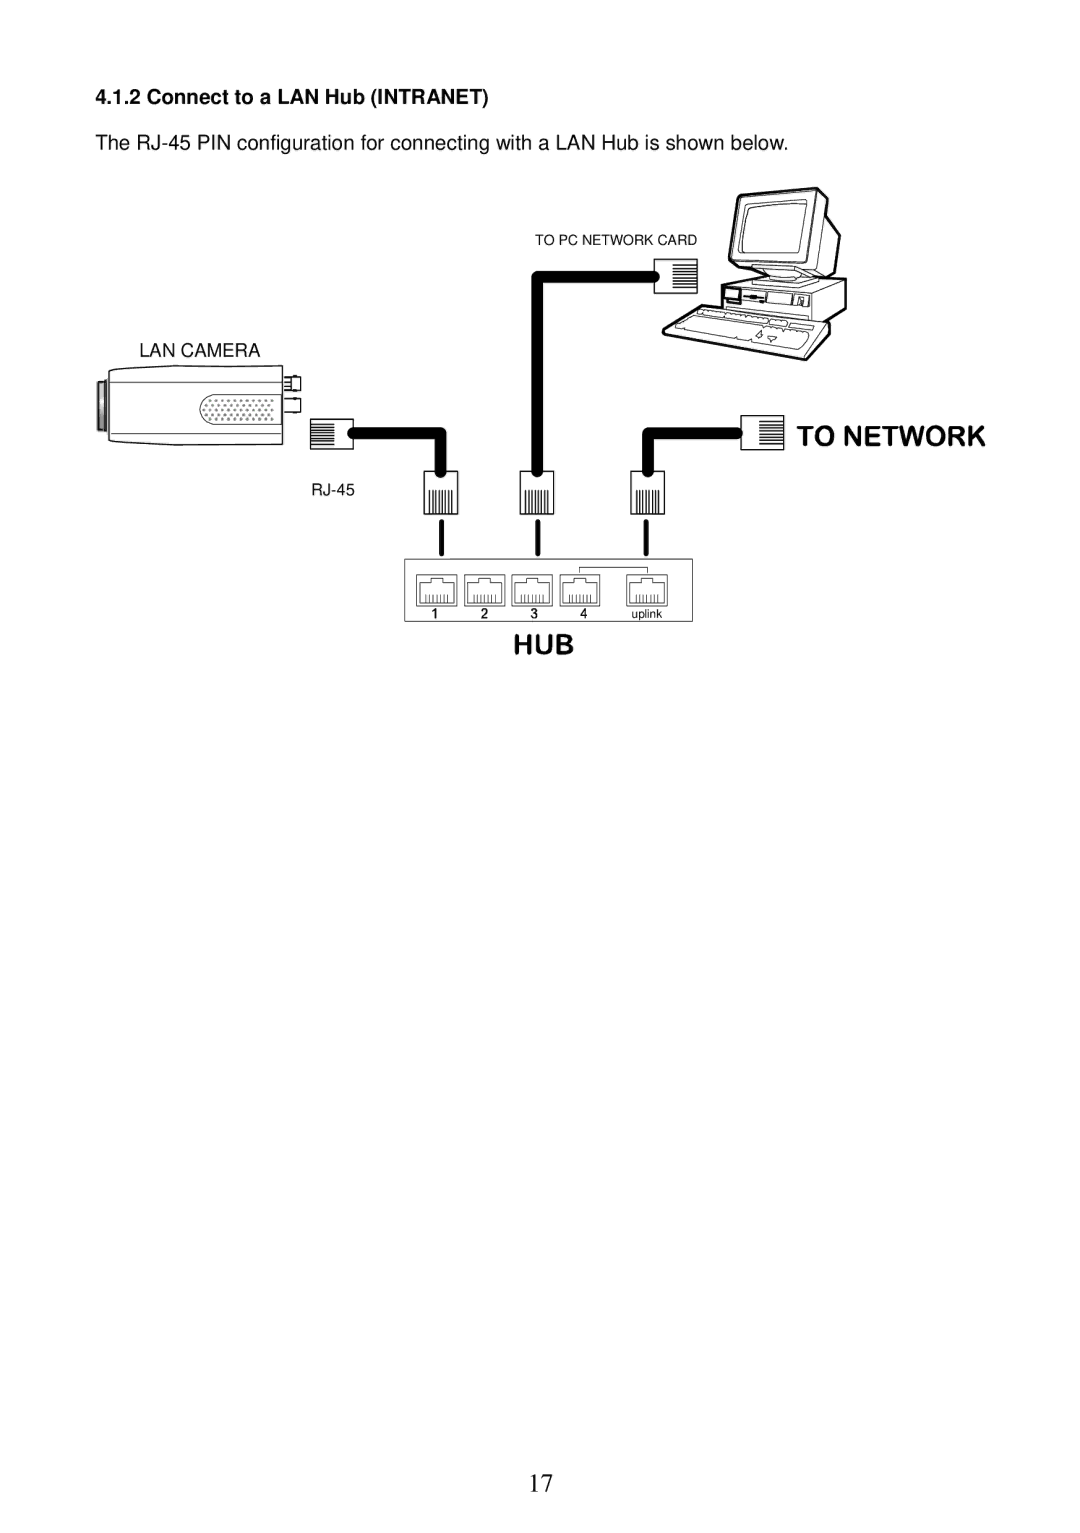 Sony MPEG4 LAN Camera operation manual Connect to a LAN Hub Intranet 